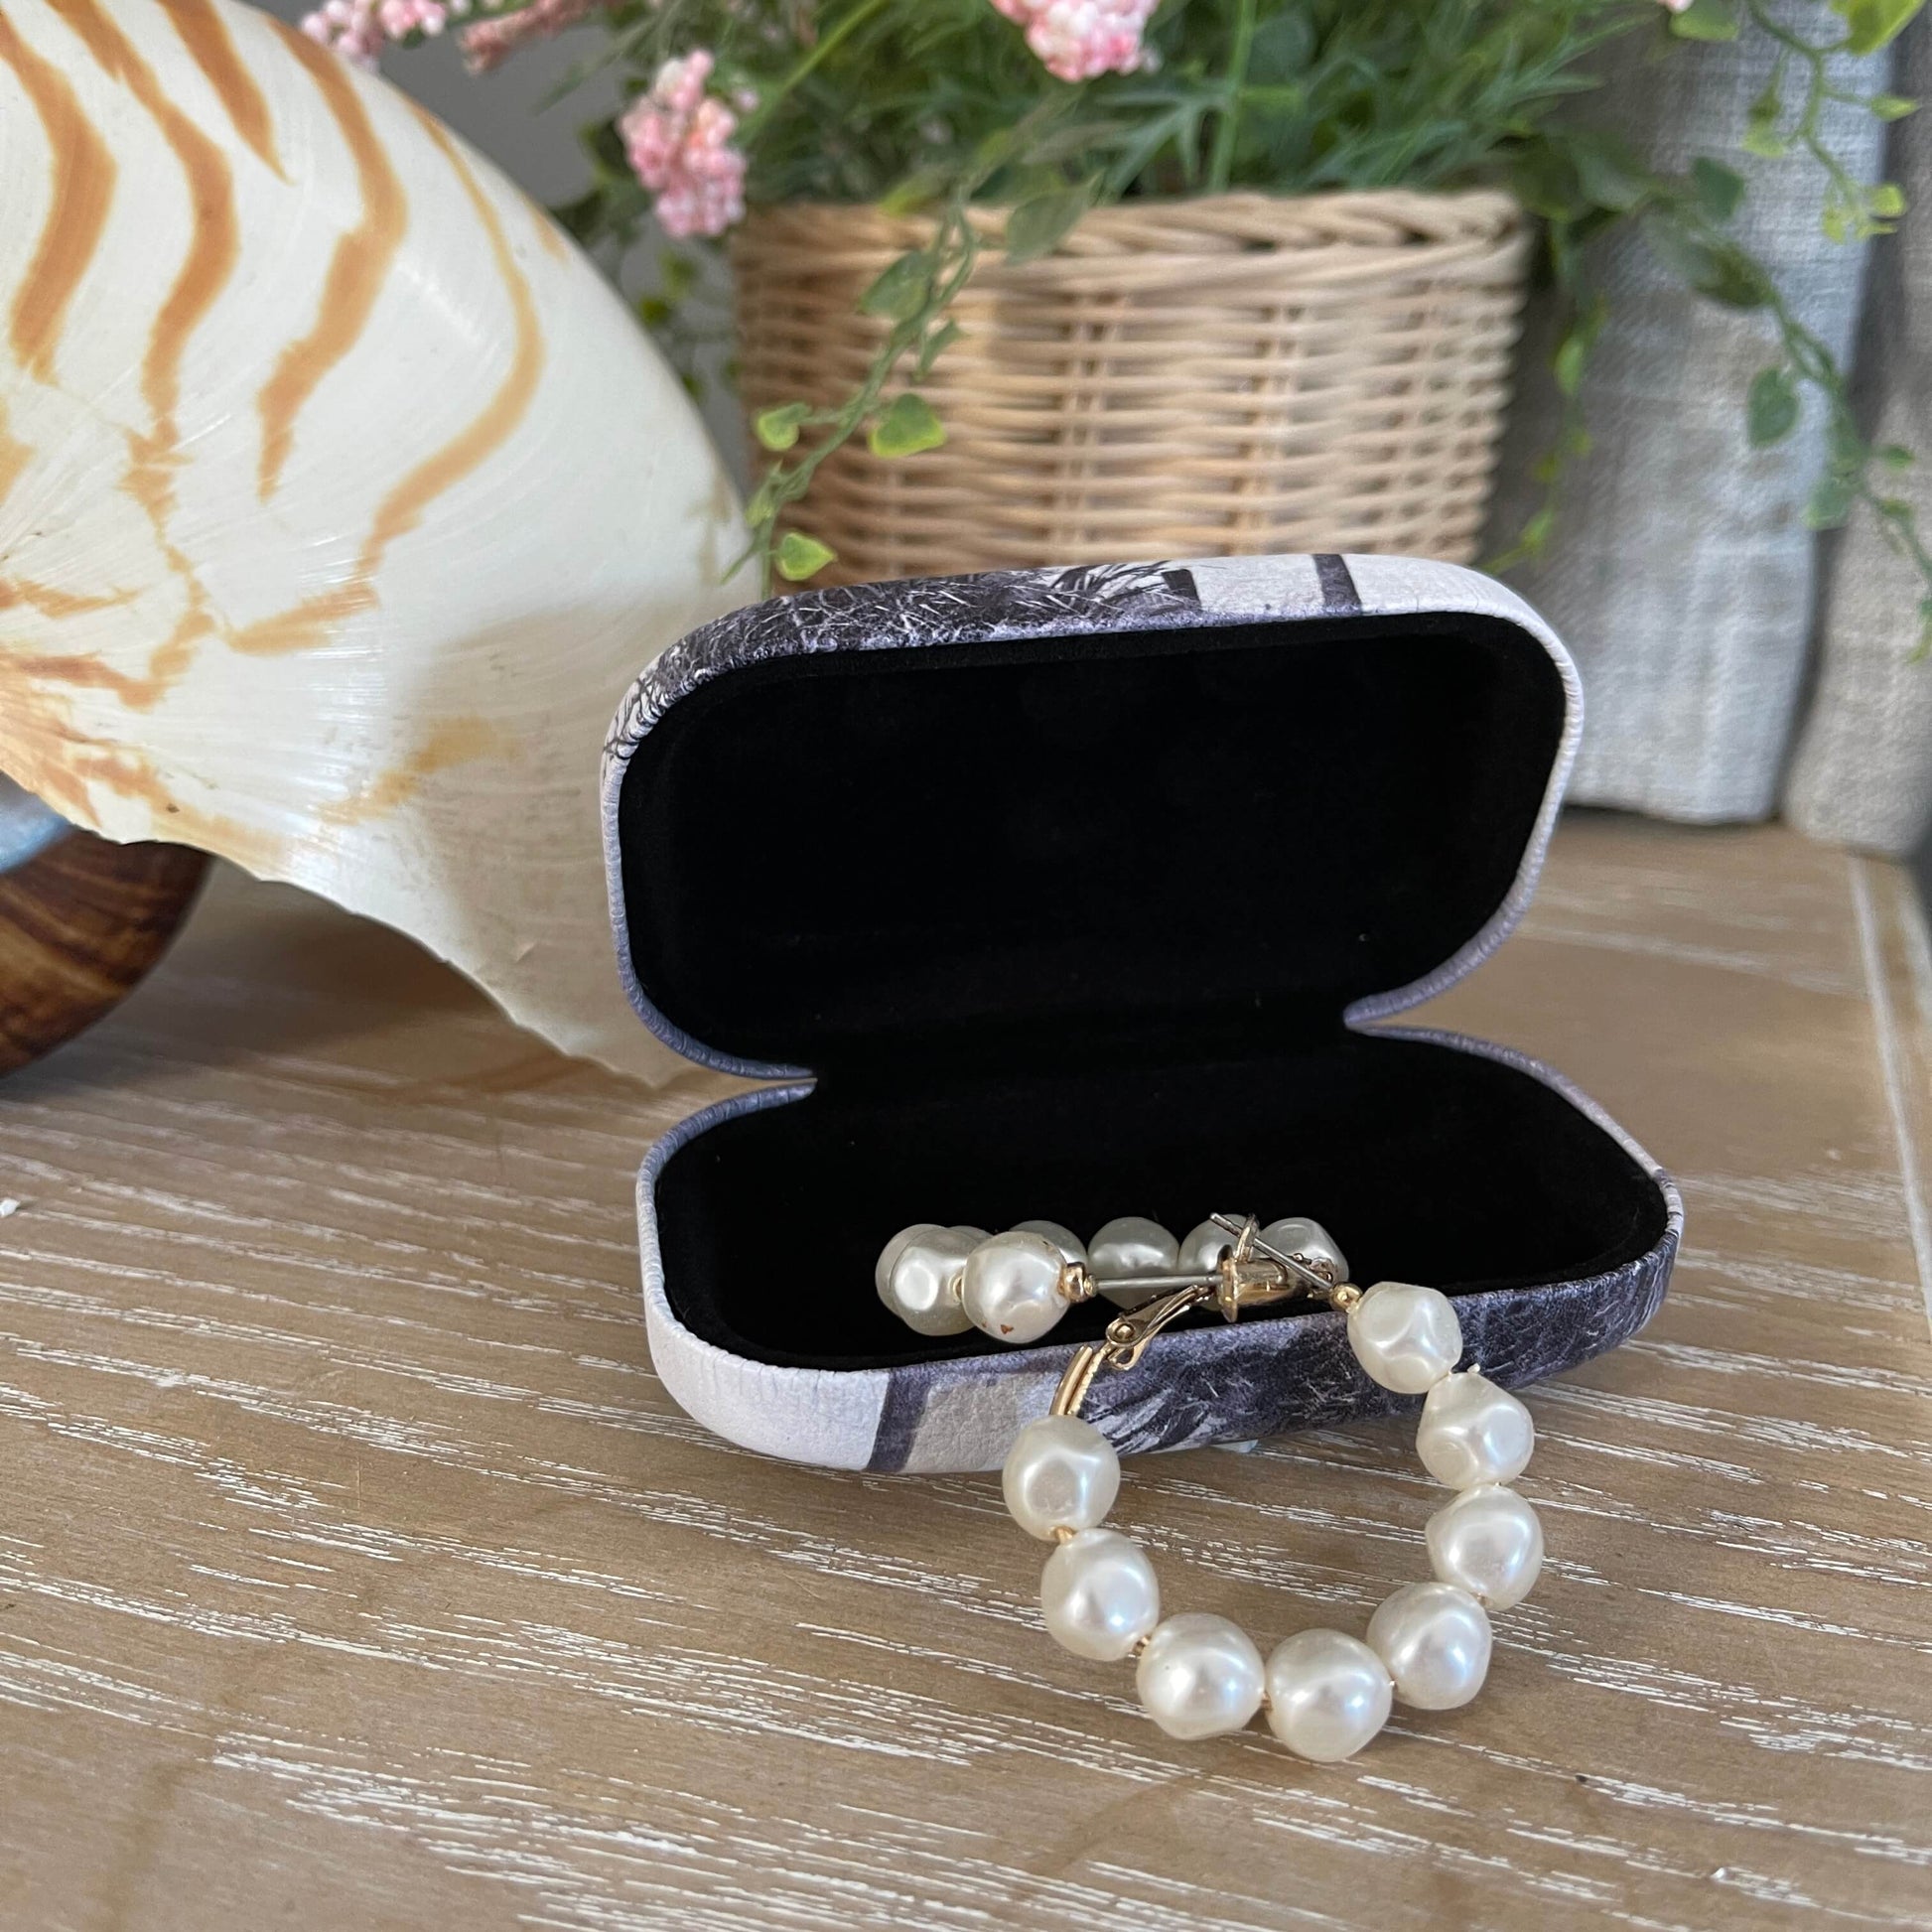 Small trinket case opened with pearl earrings in it sitting on a table with a large shell and faux pot plant.